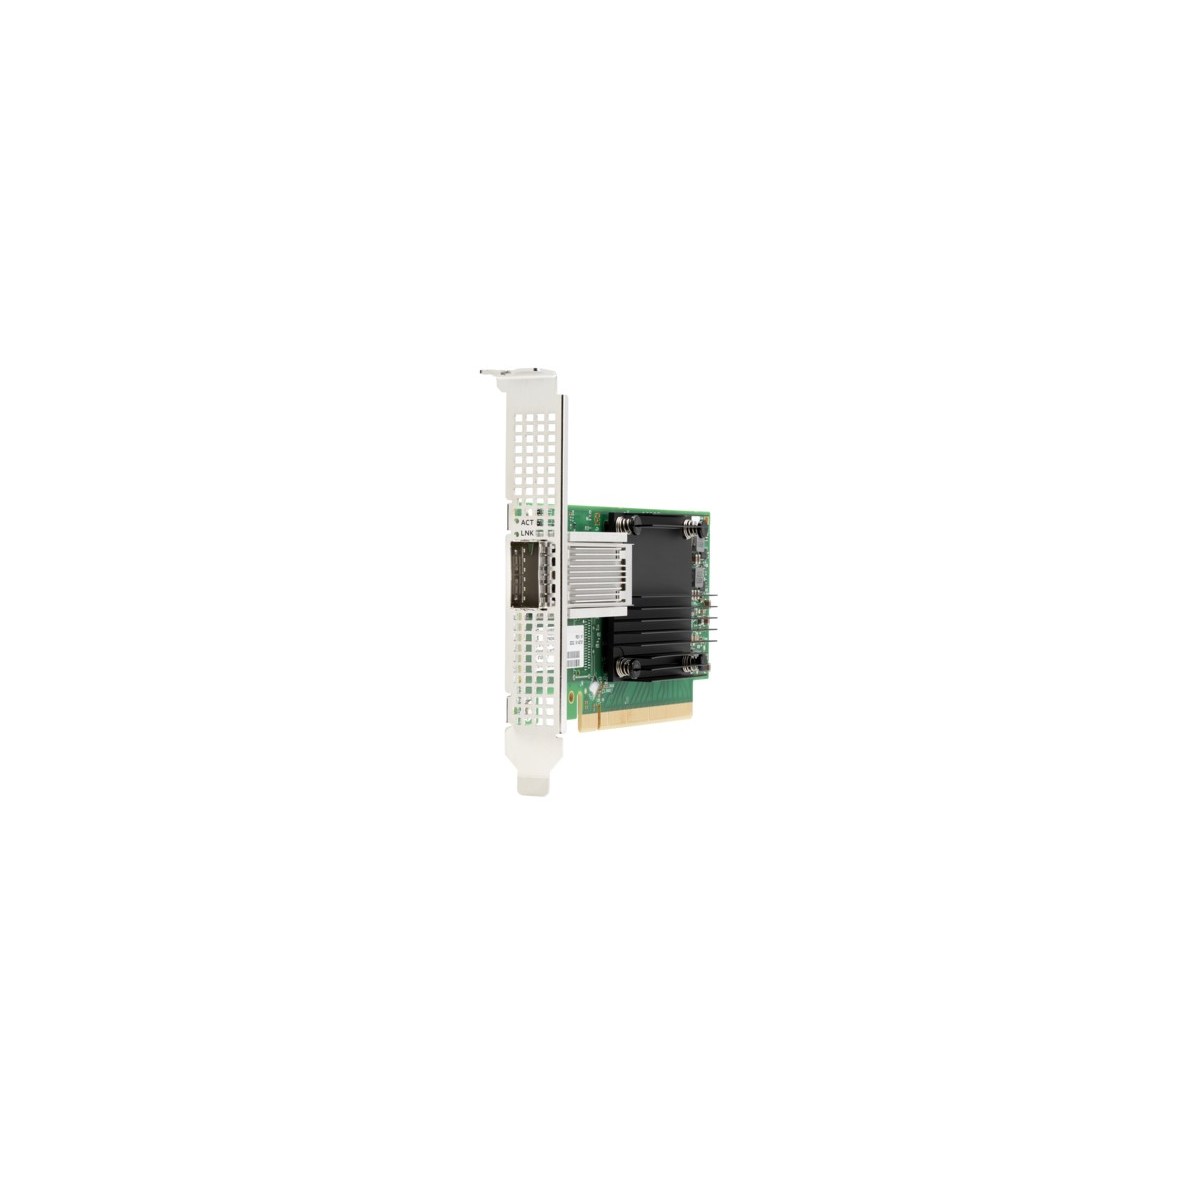 HPE 842QSFP28 - Internal - Wired - PCIe - Ethernet - 100000 Mbit/s